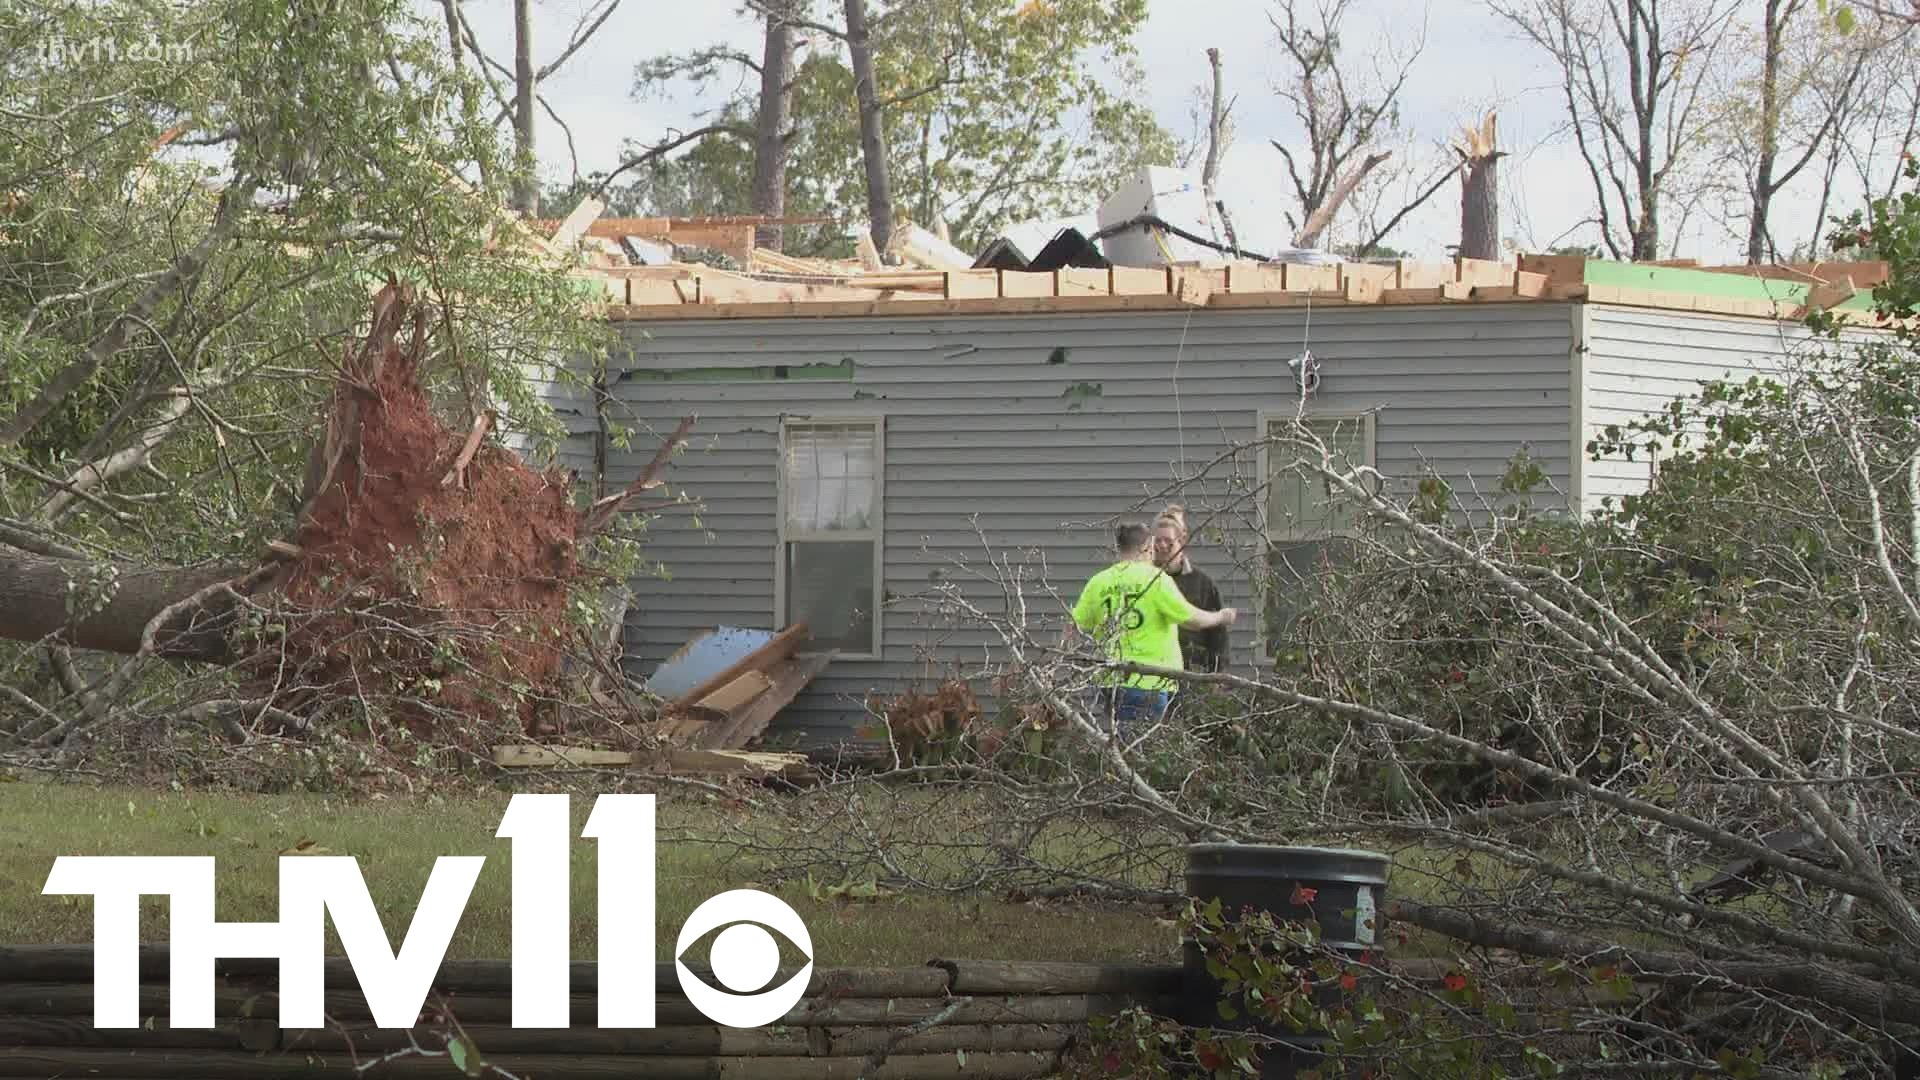 People in the East End community spent most of Saturday sorting through debris and cleaning up after a tornado passed through the night before.